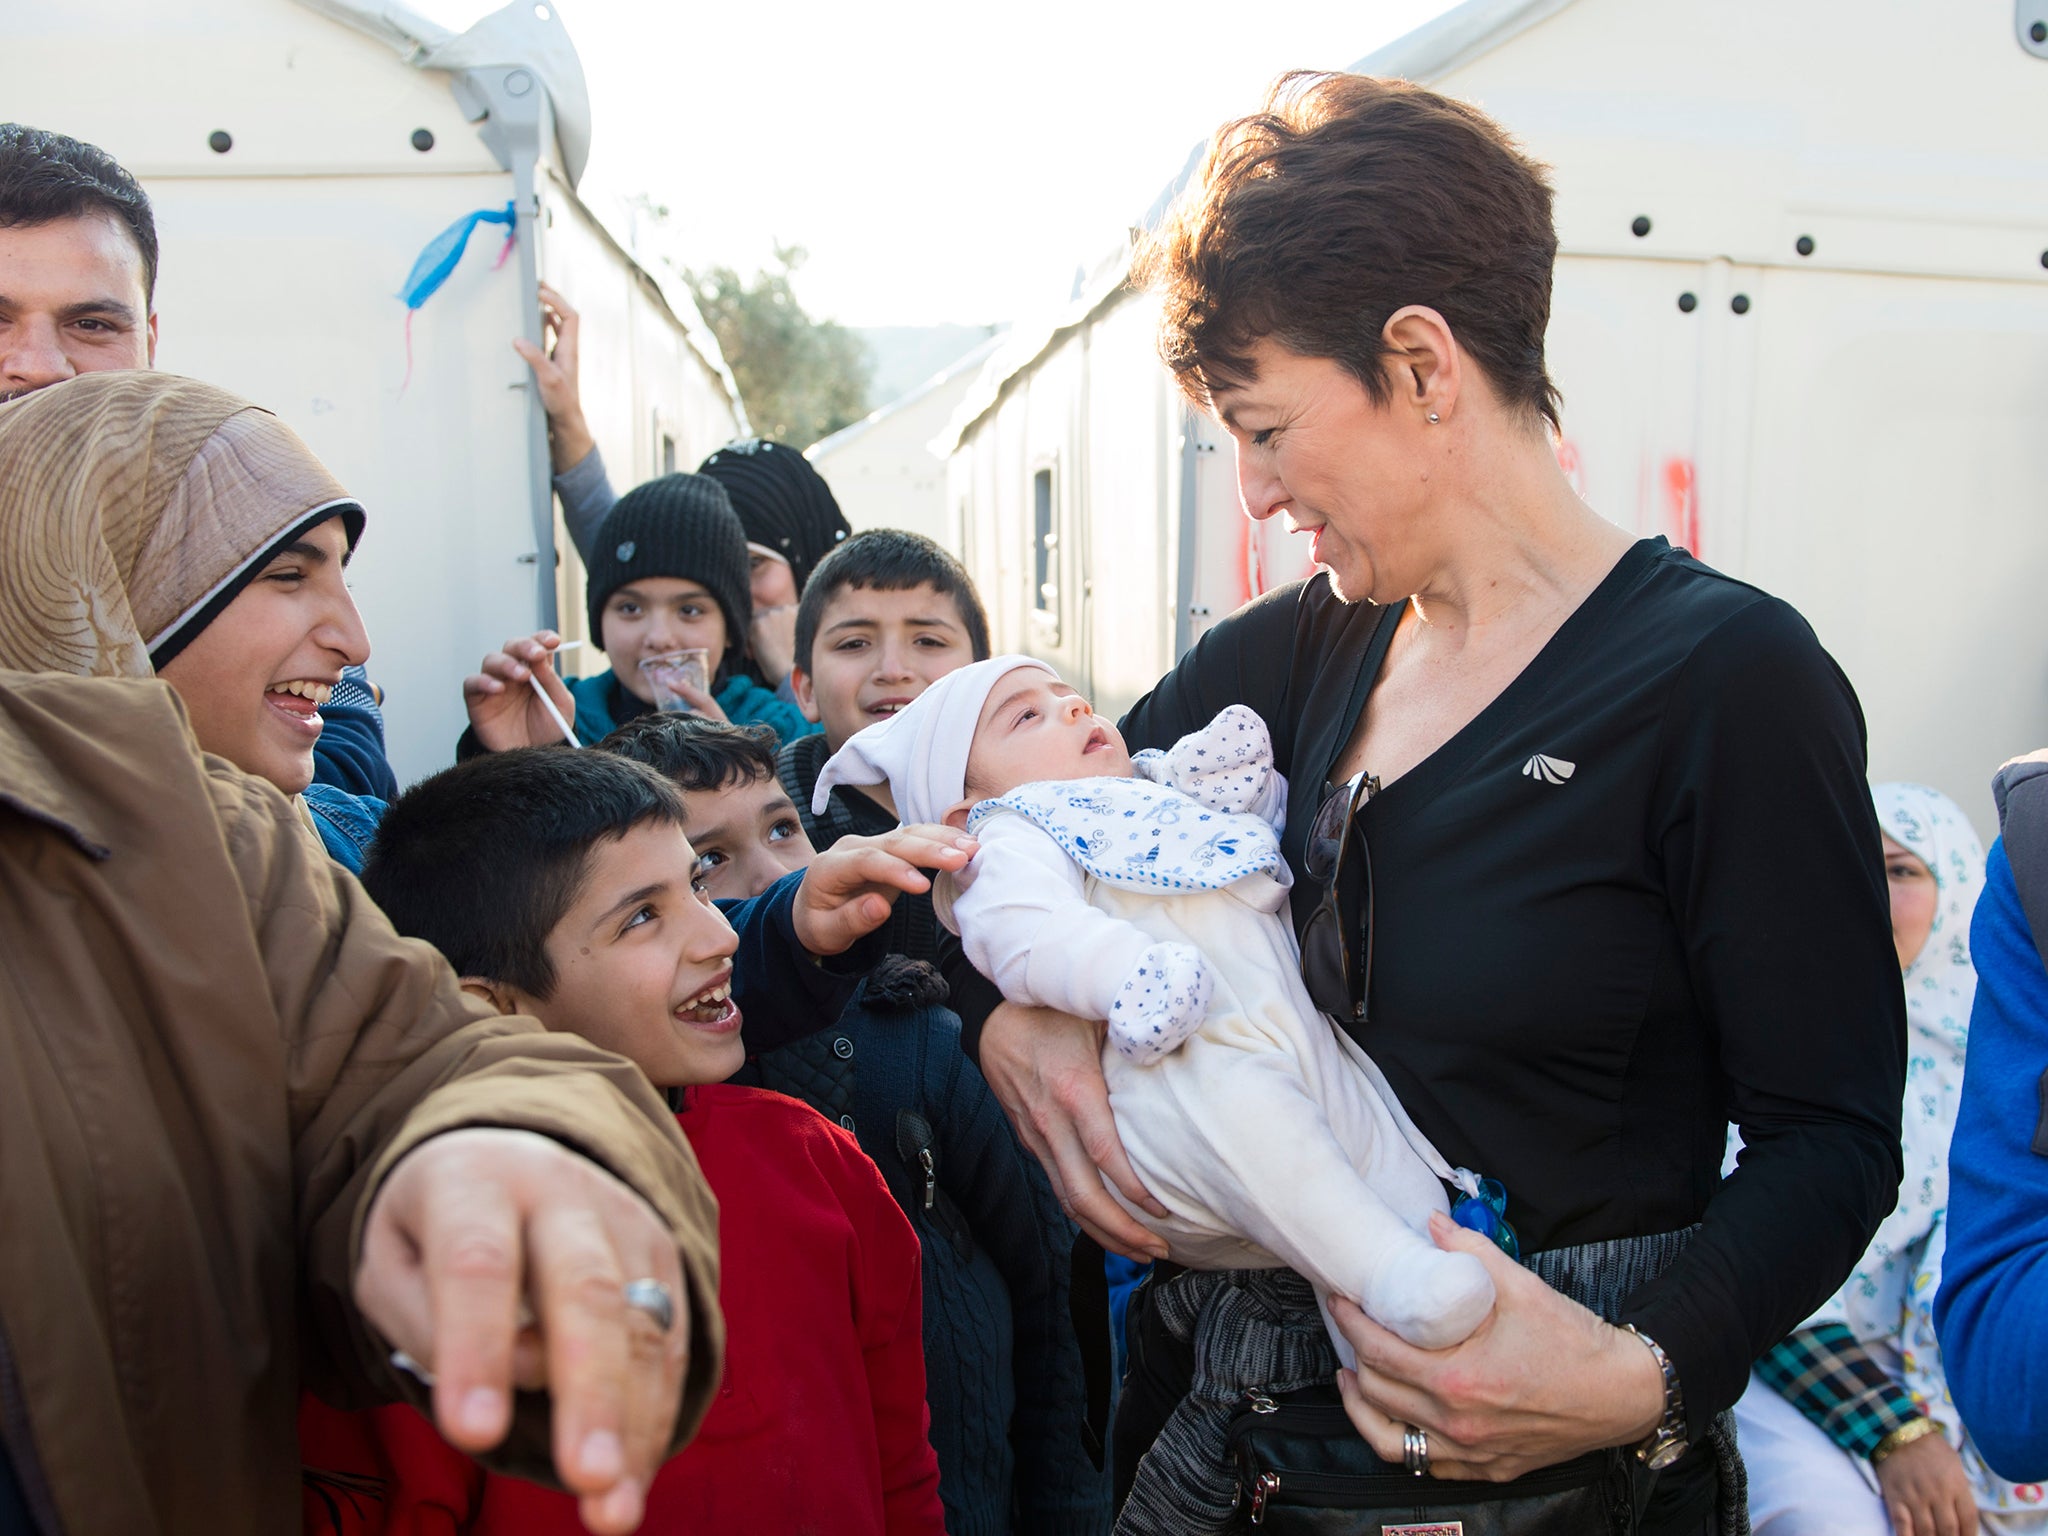 Jo Churchill holds a baby during the visit (Matt Crossick/Save The Children)